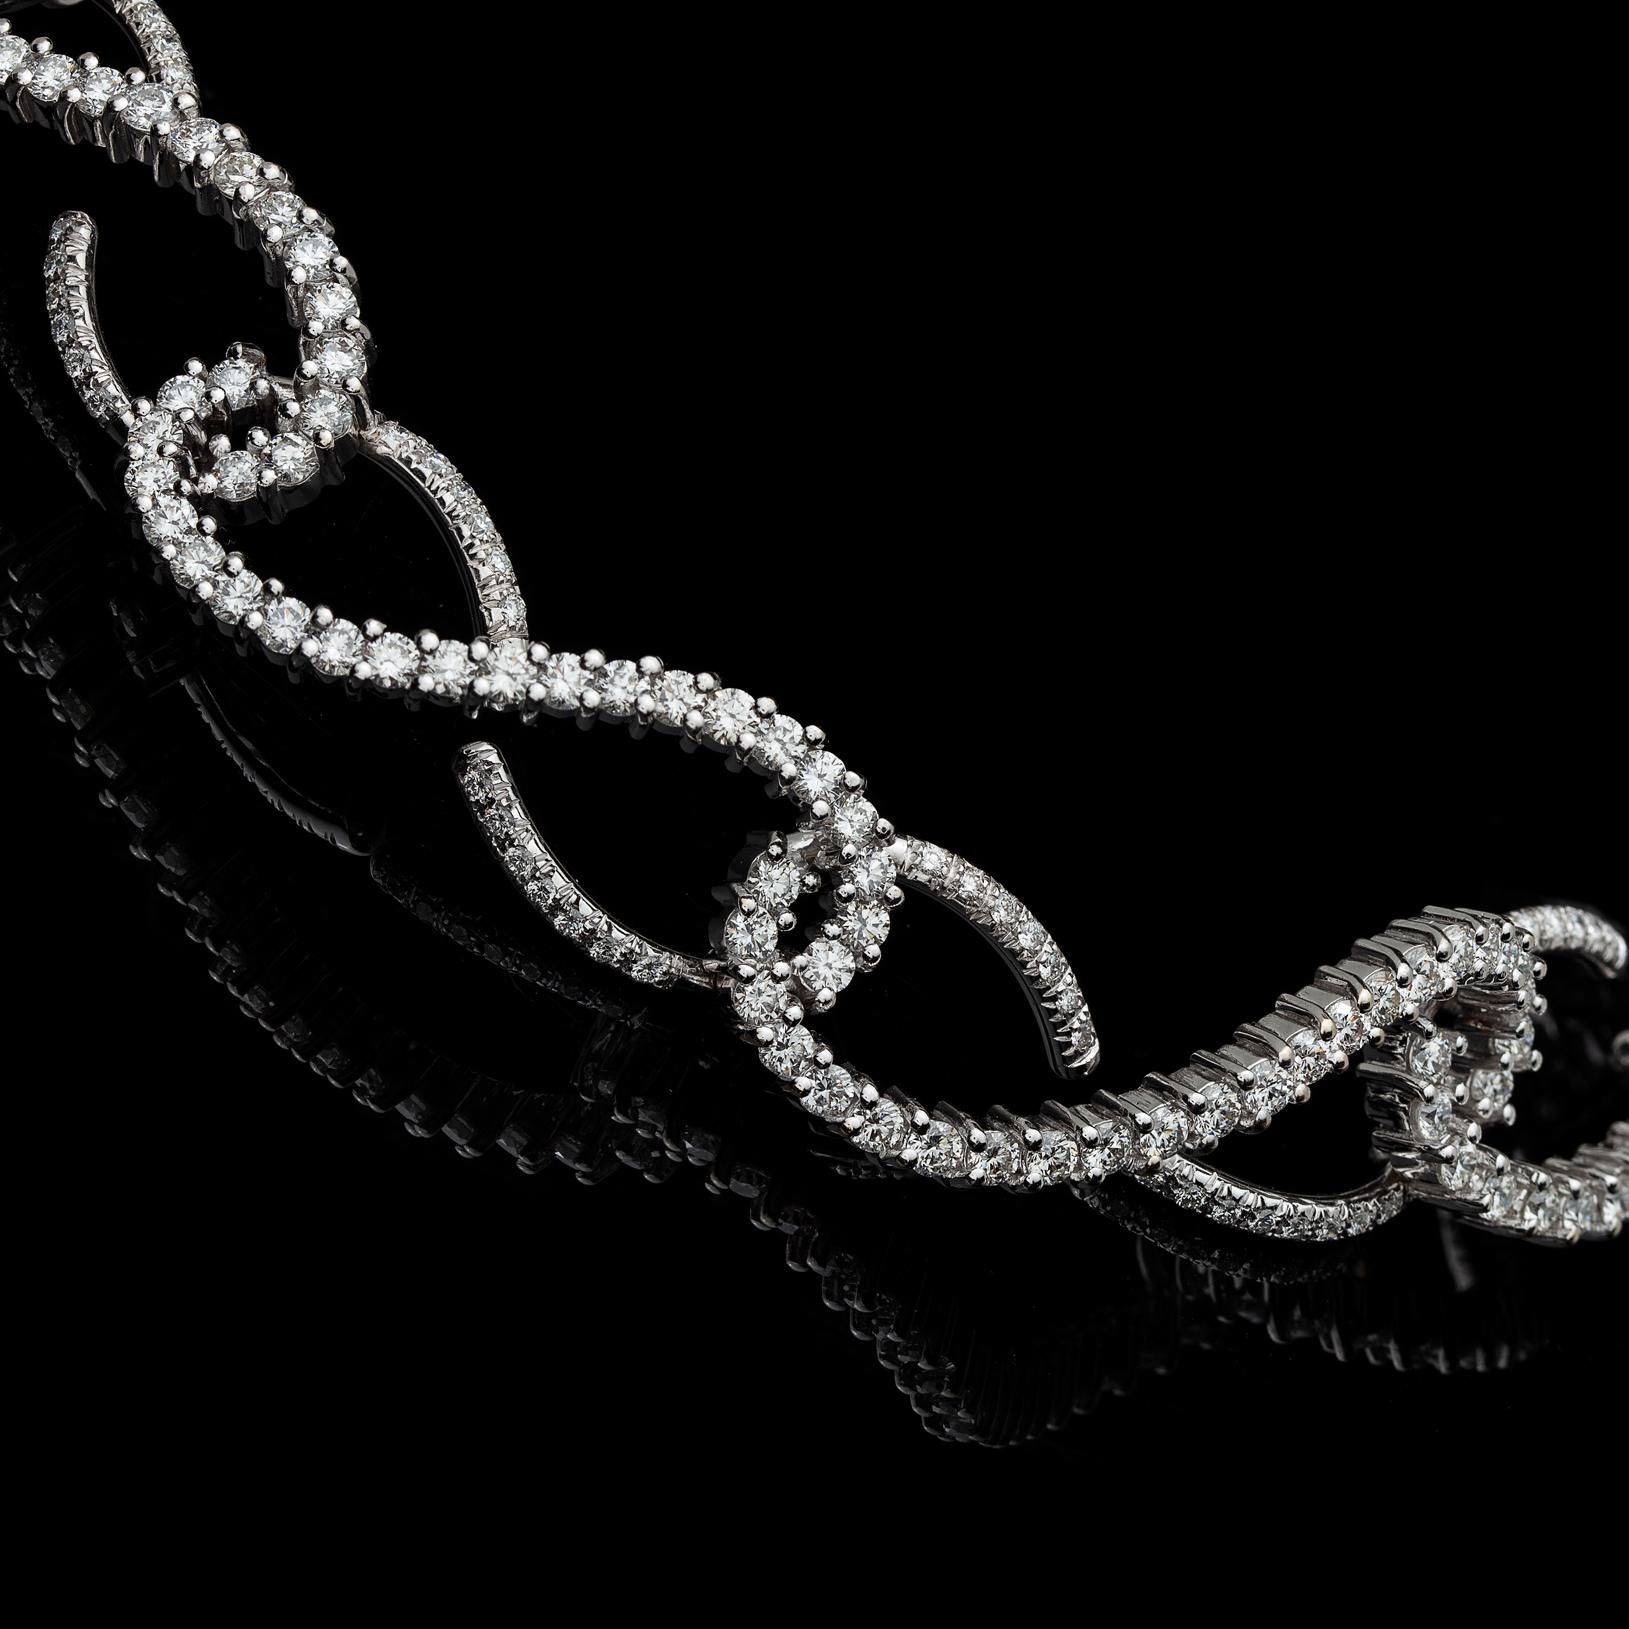 Diamonds are forever! This choker-necklace is designed with diamond-set links symbolizing eternity, featuring round brilliant-cut diamonds weighing in total approximately 7.84cts. The necklace weighs 62.2 grams, and is 14 inches long. A statement